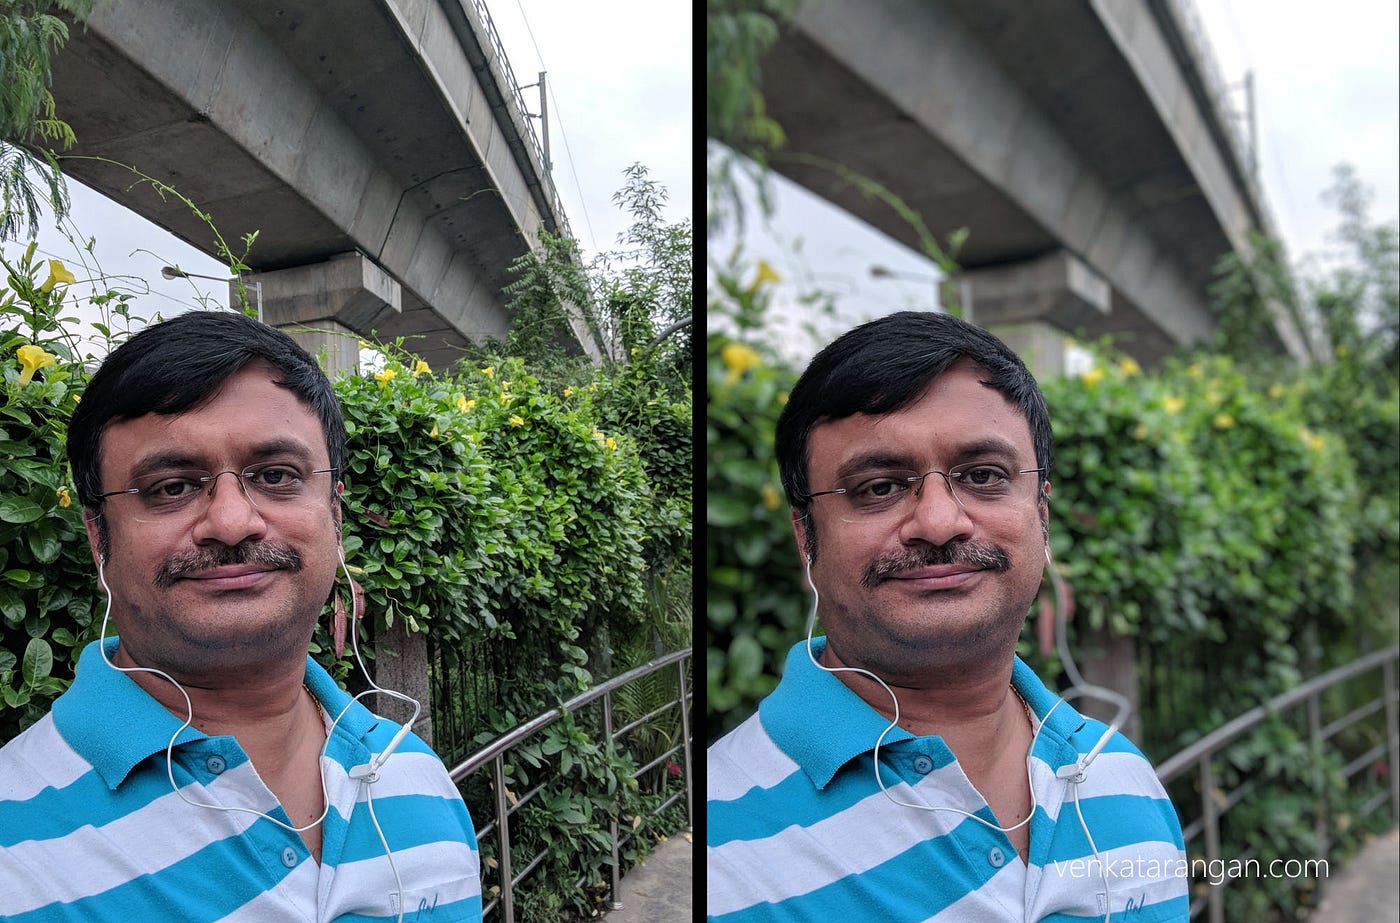 On Left Selfie from the front camera; On Right is Bokeh effect added automatically after processing, which takes a second